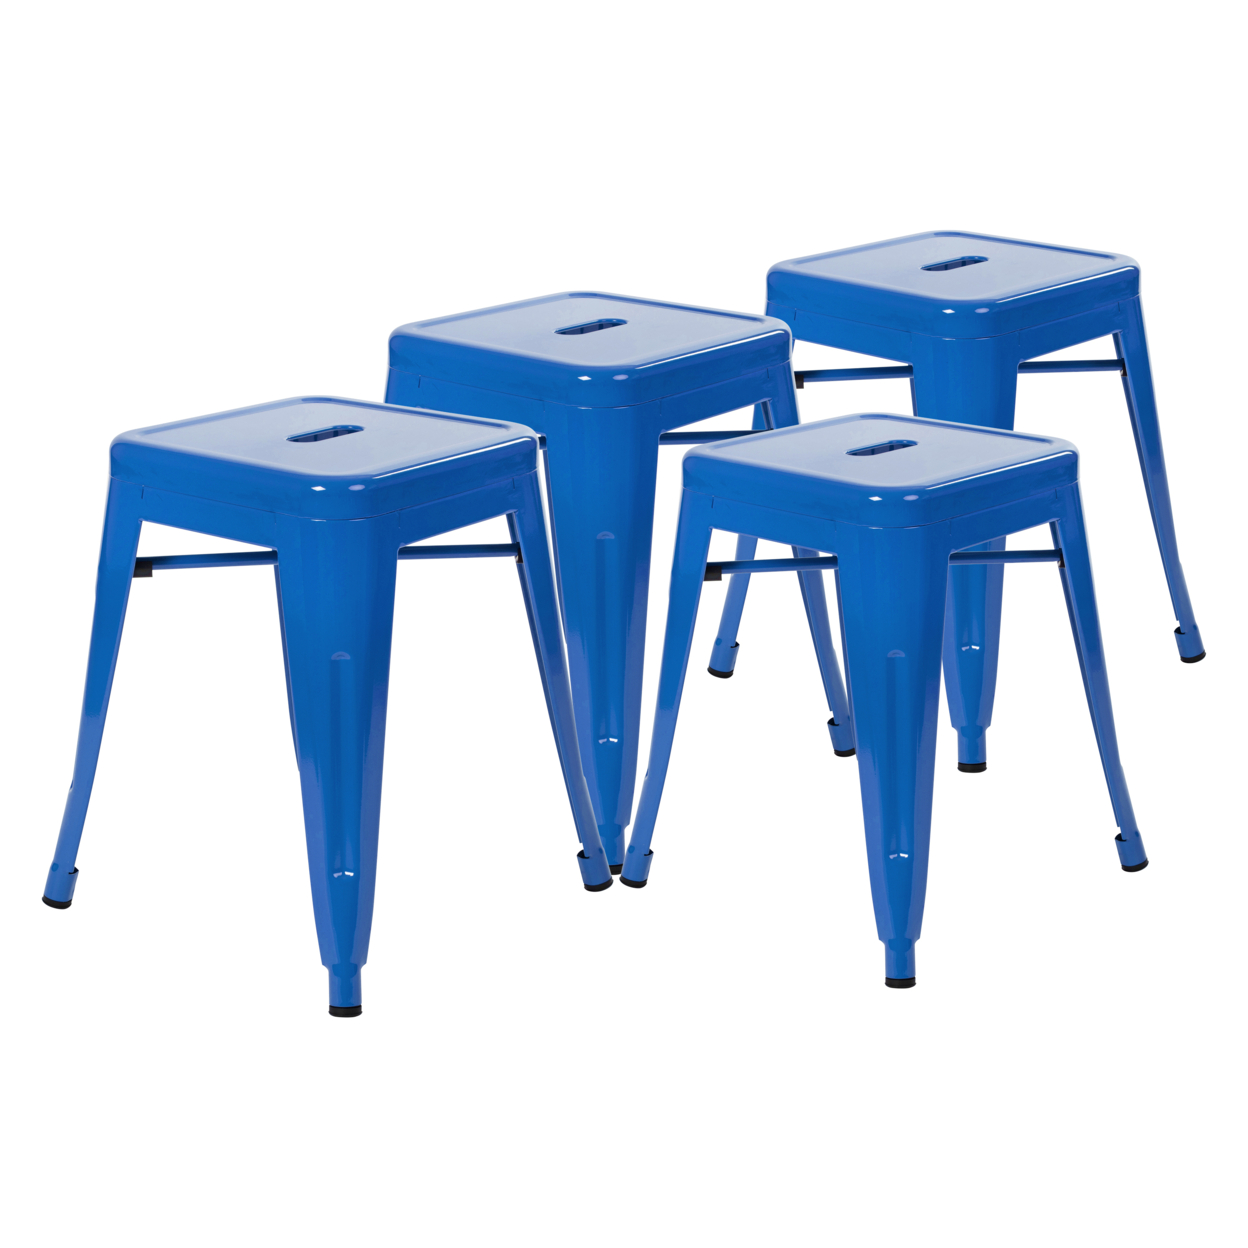 18 Table Height Stool, Stackable Backless Metal Indoor Dining Stool, Commercial Grade Restaurant Stool In Royal Blue - Set Of 4